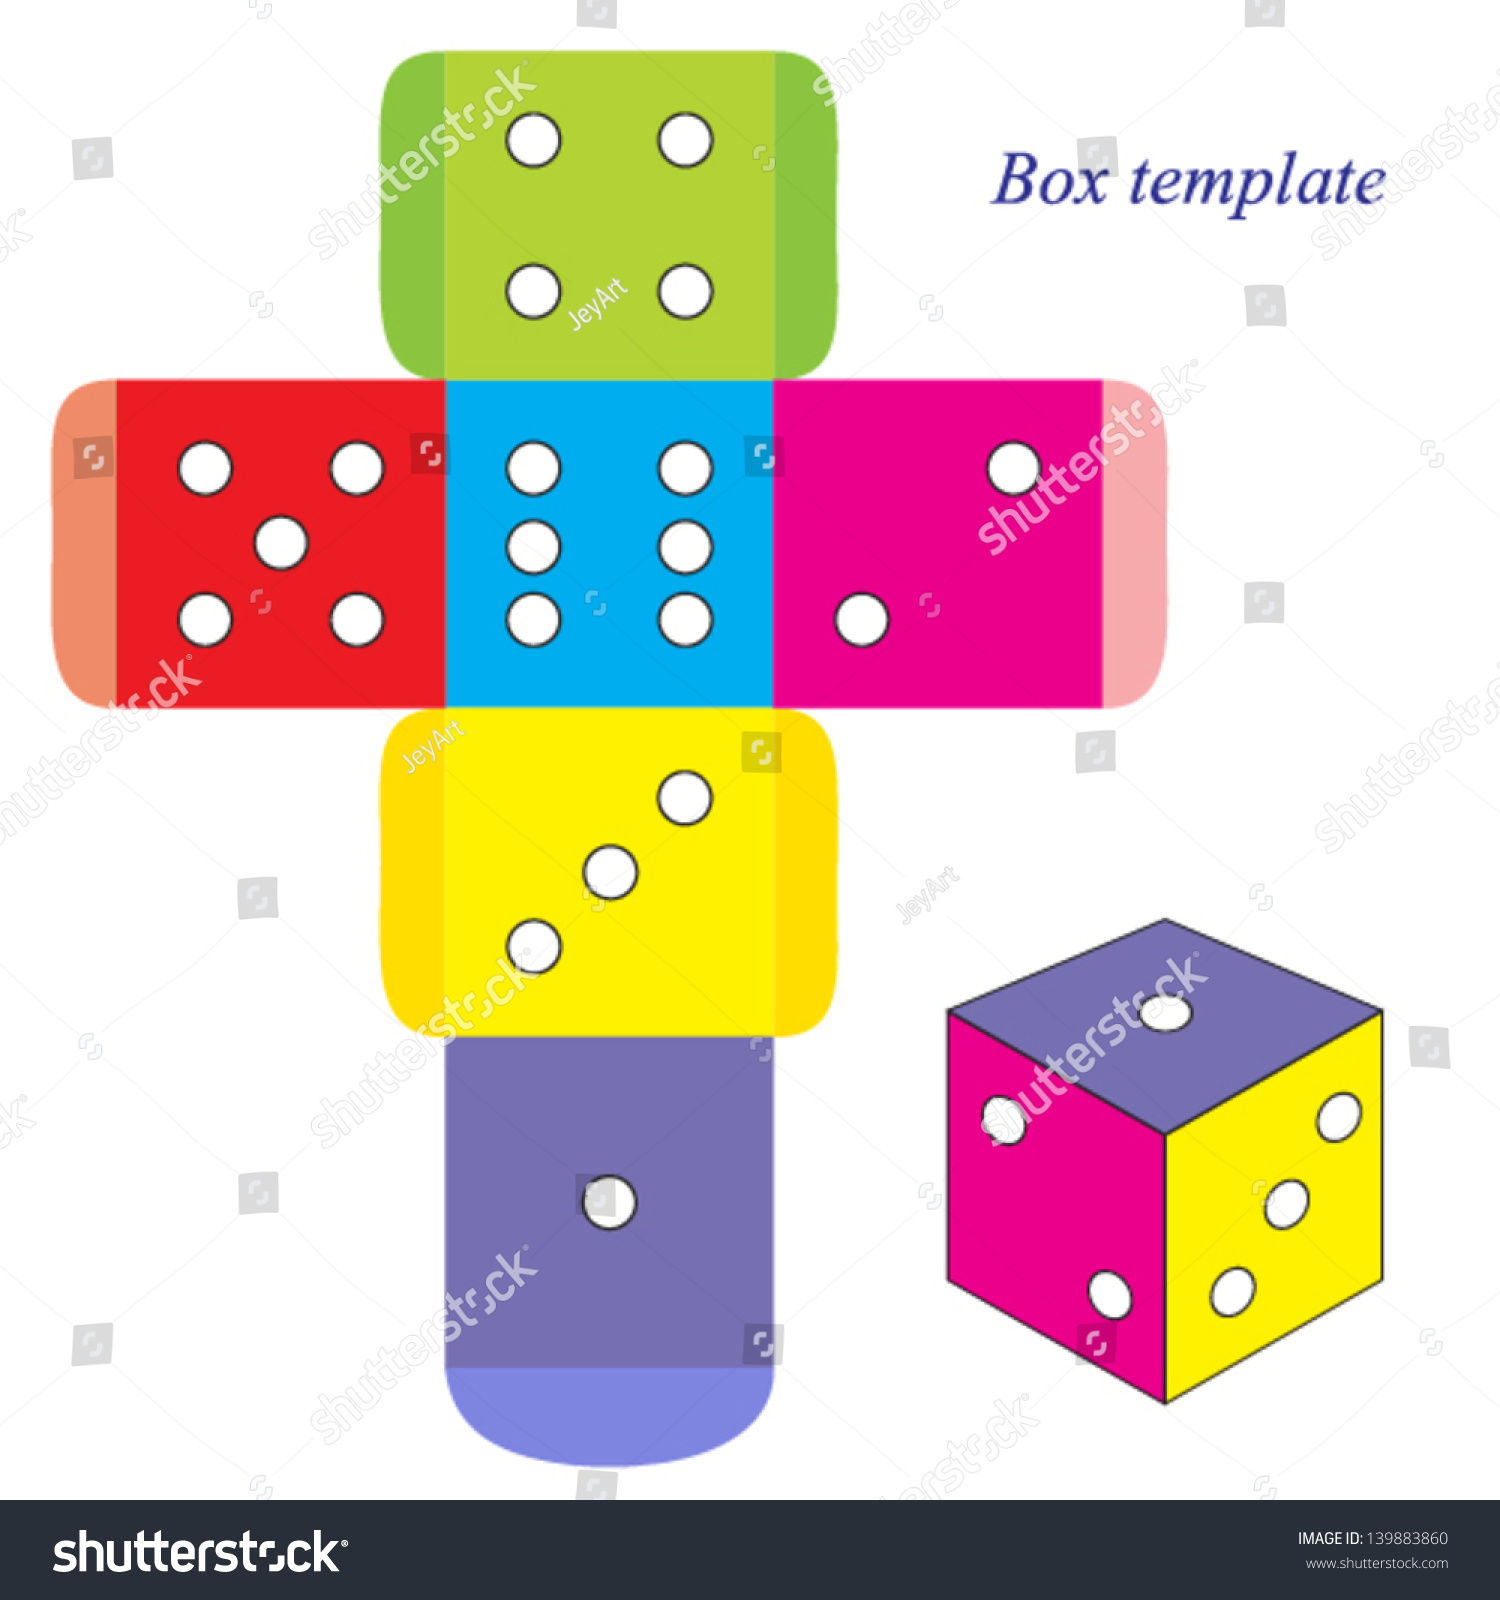 colorful dice box template vector illustration stock vector royalty free 139883860